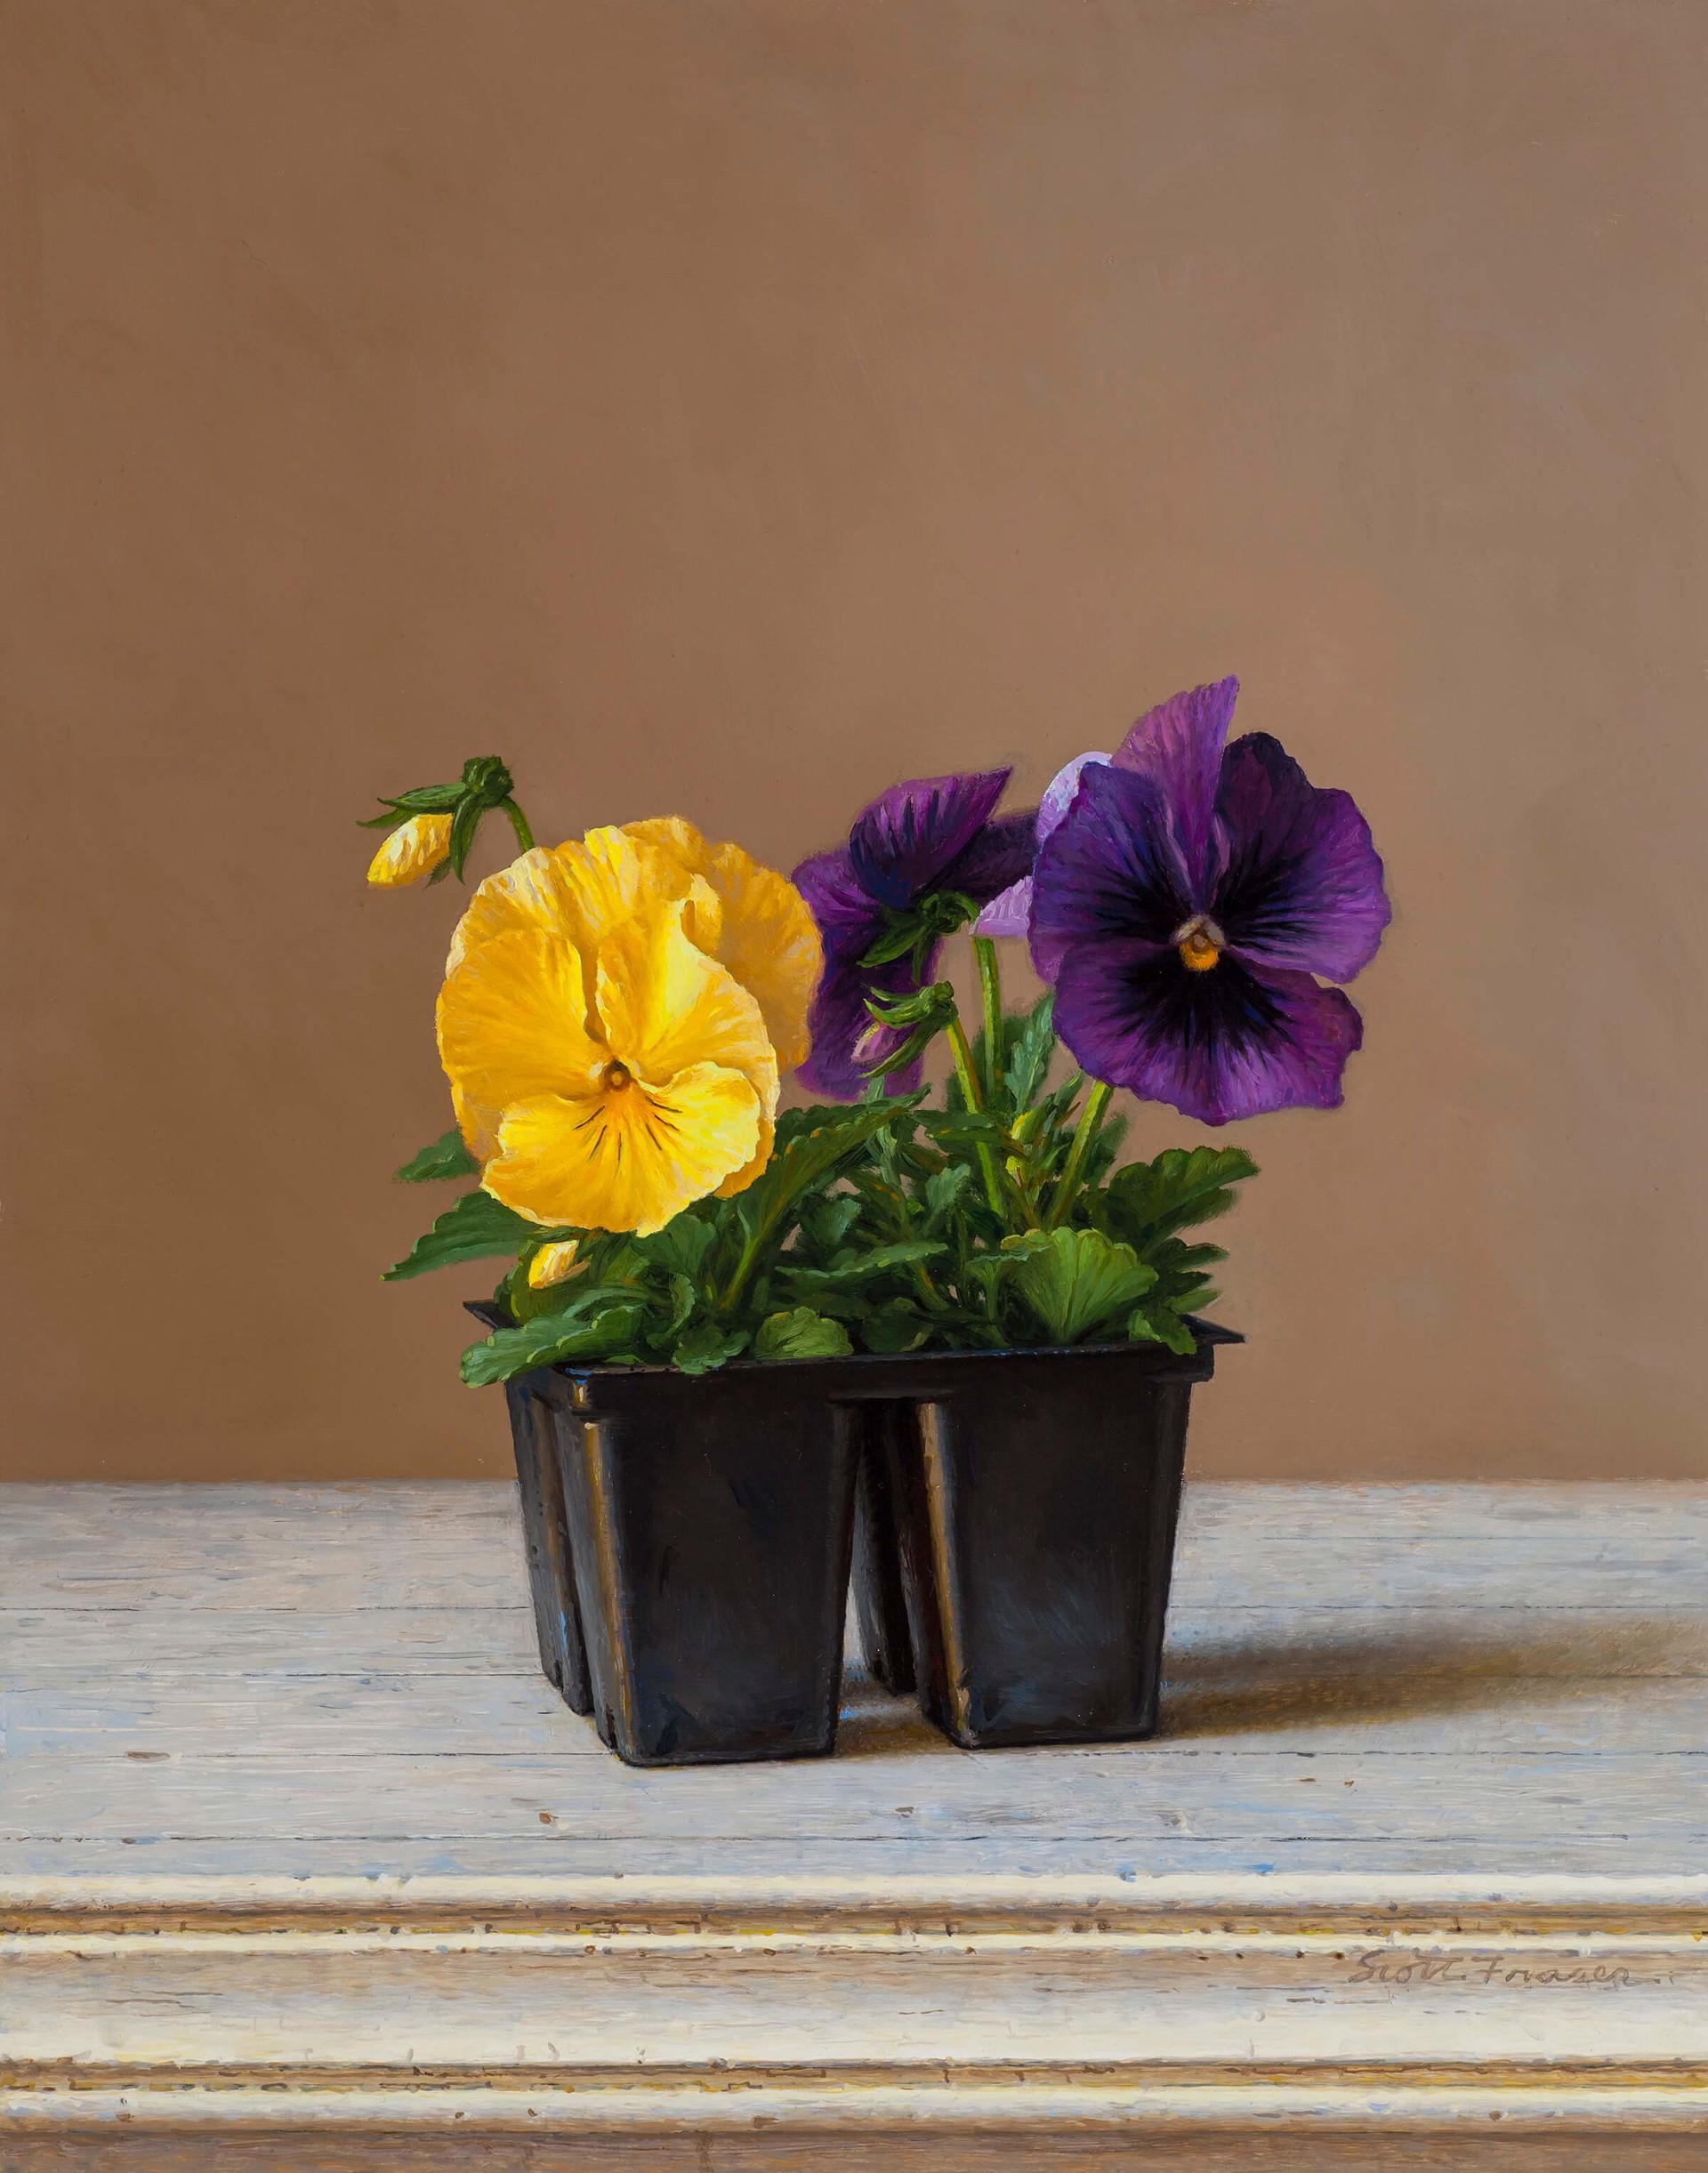 Pack of Pansies by Scott Fraser